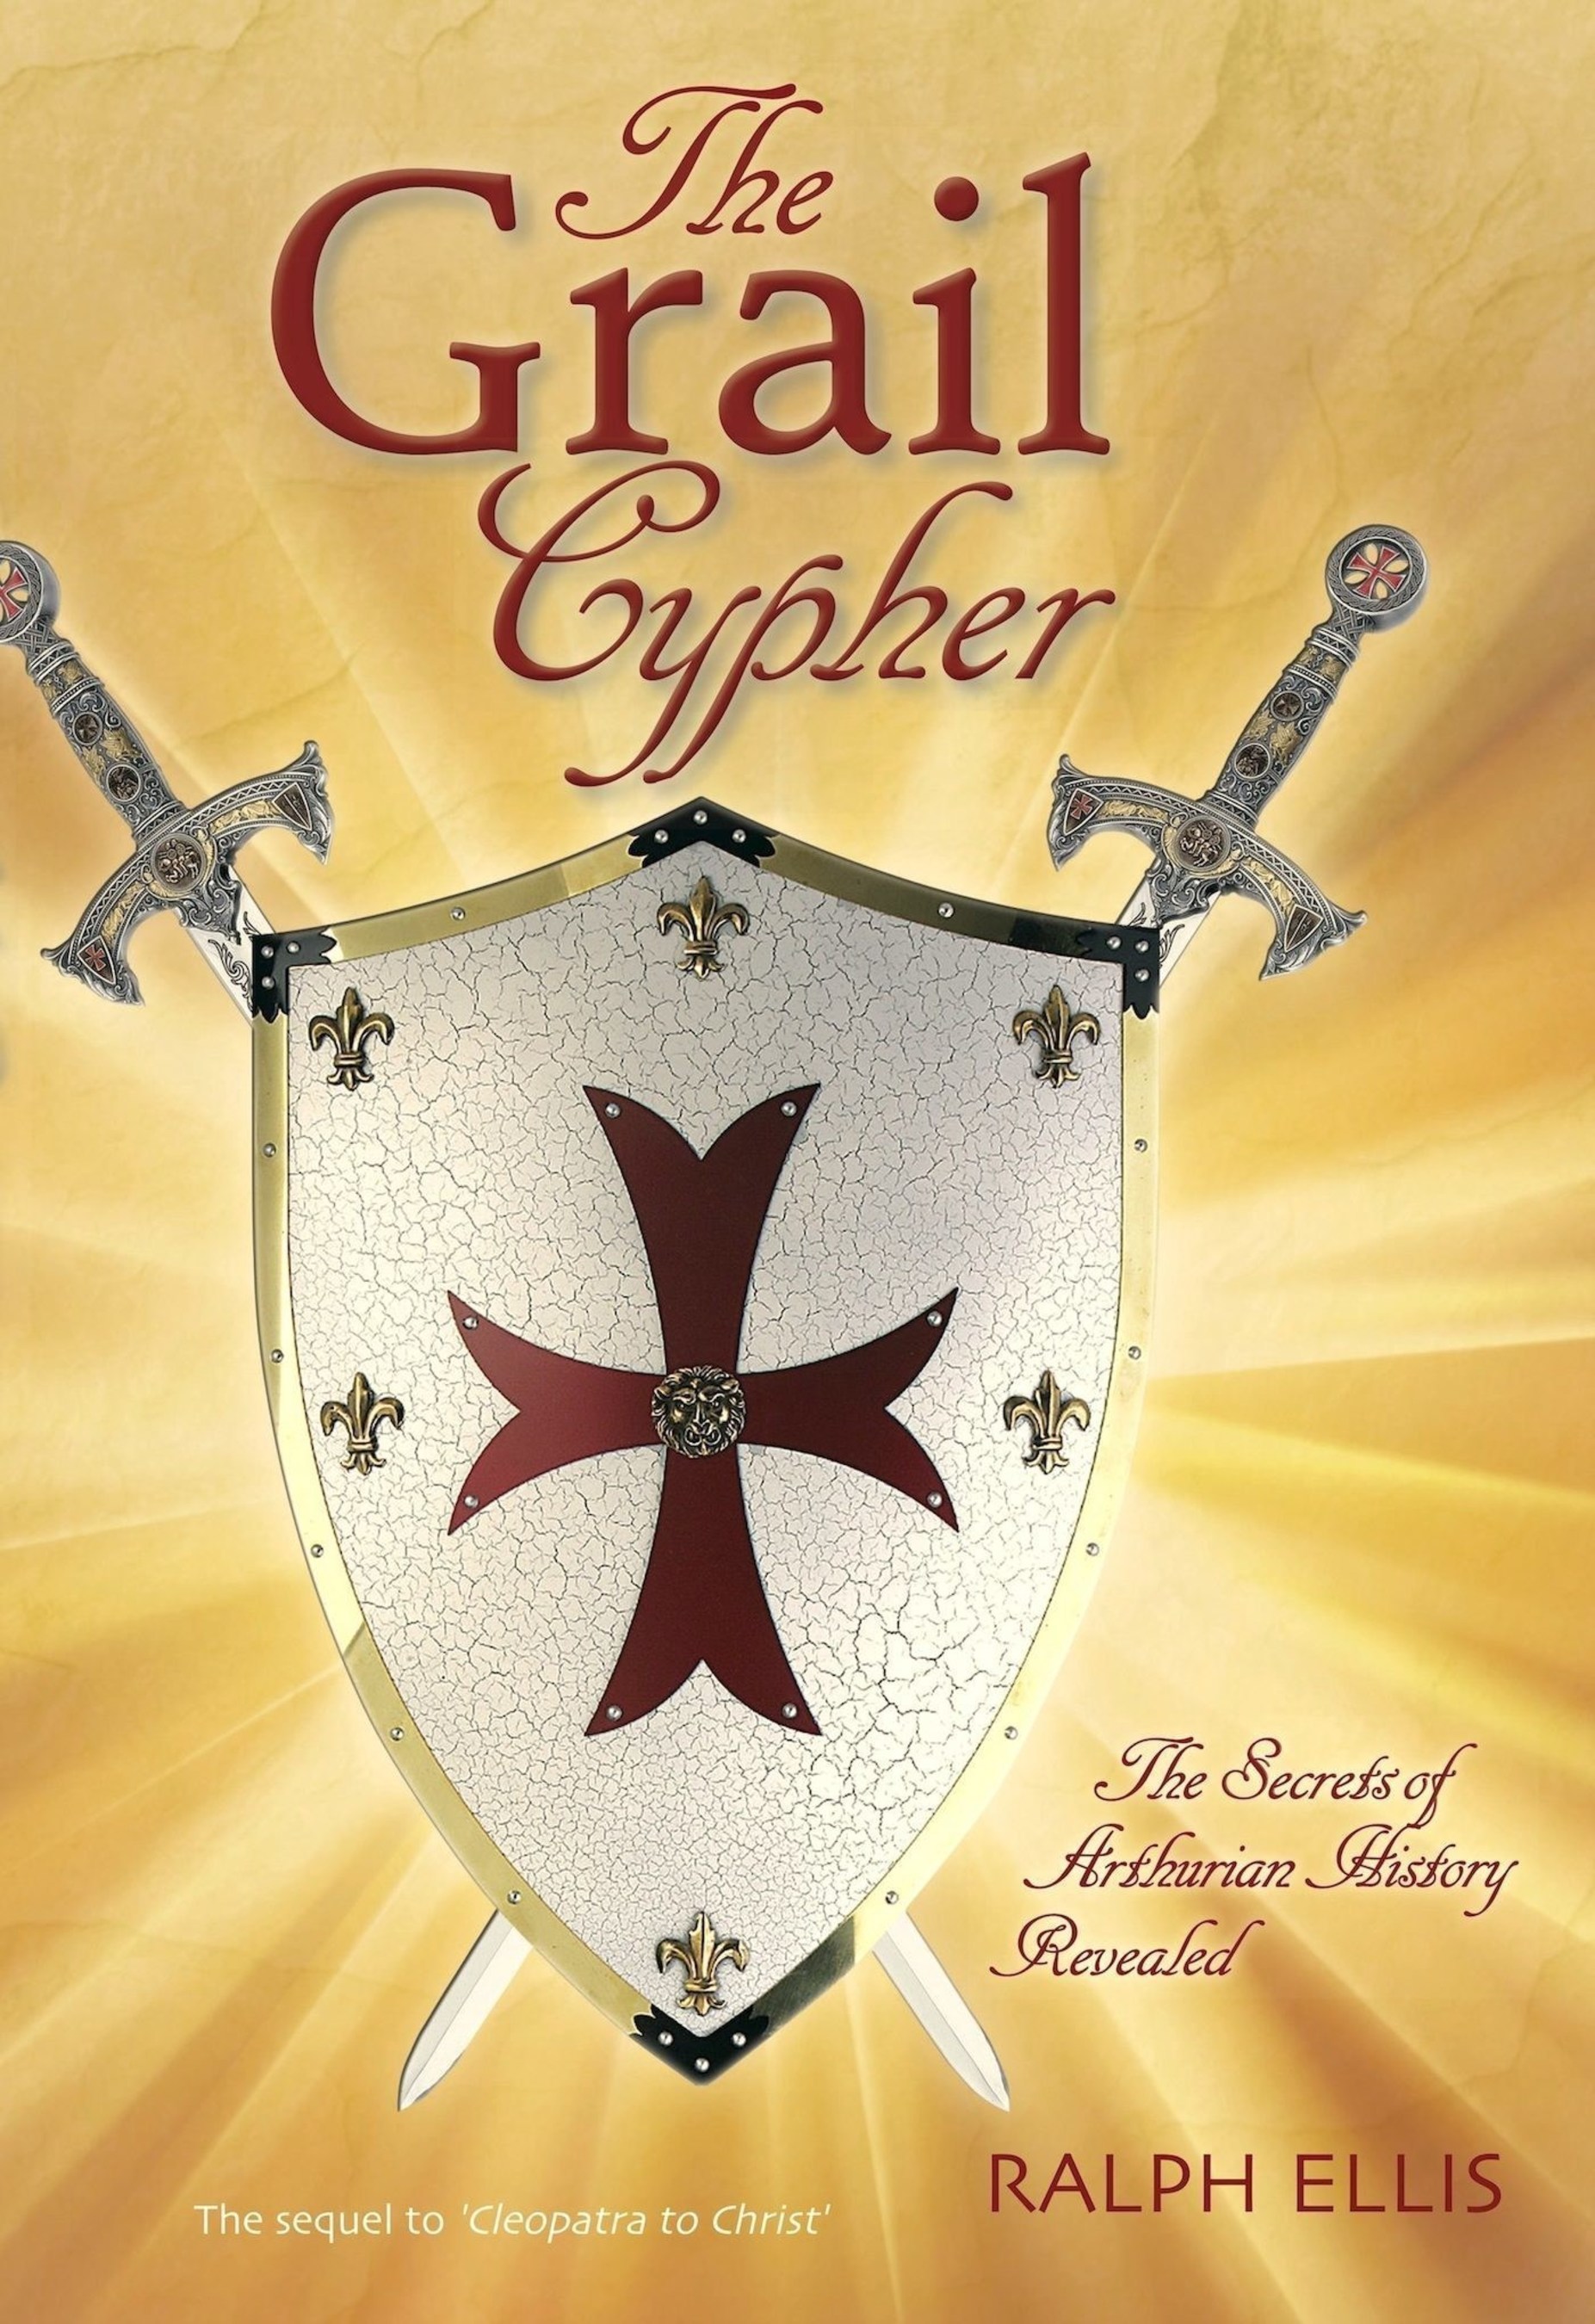 The Grail Cypher by Ralph Ellis: A revolutionary exploration of Arthurian history. This book demonstrates that the life of King Arthur was based upon the life of King Jesus of Judaea.  September 2015 release, by Edfu Books.